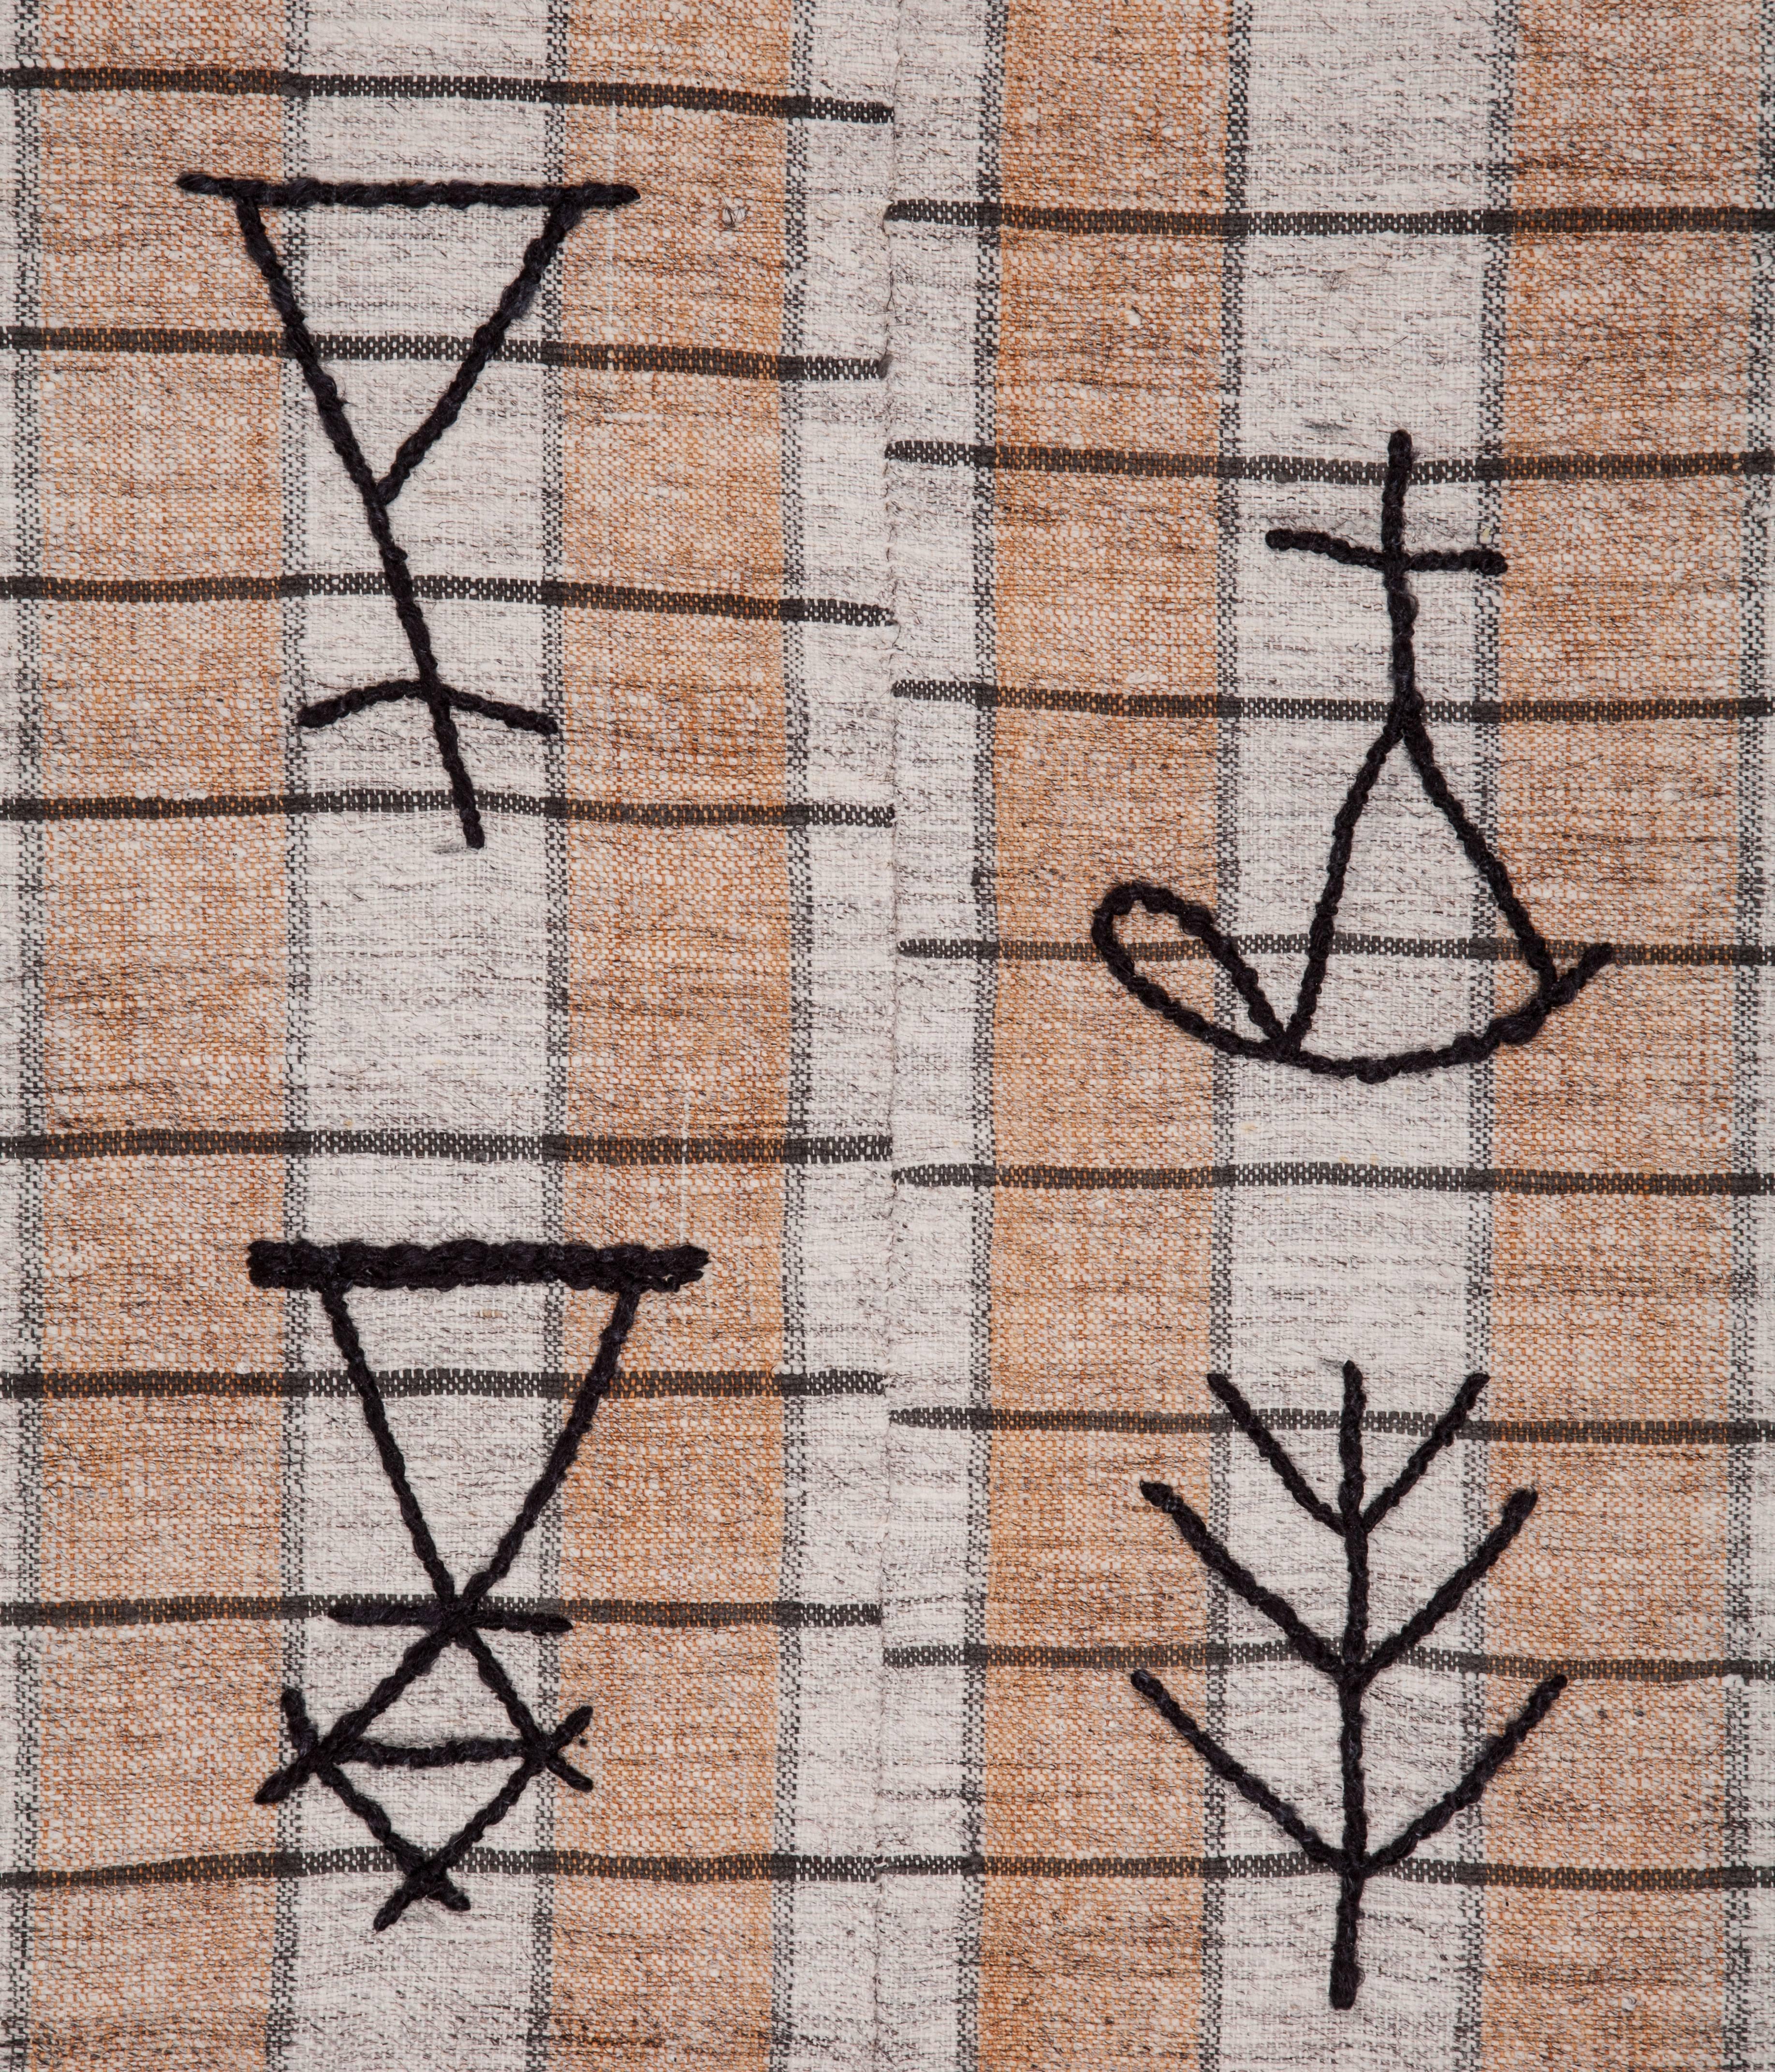 Tribal New Design on a Vintage Anatolian Kilim by Seref Ozen 6'1'' x 11'1'' For Sale